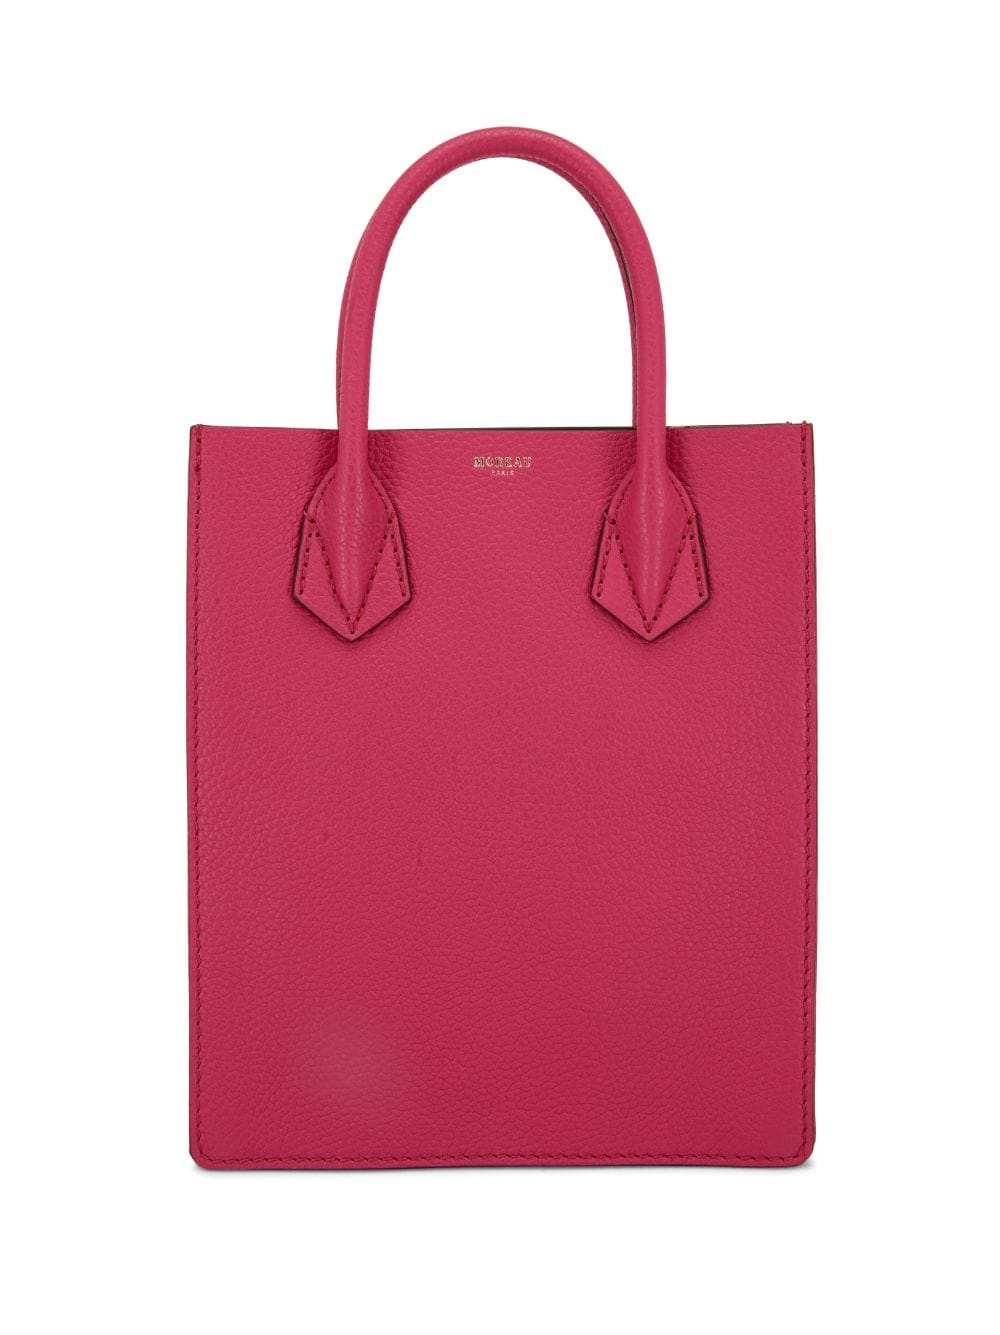 engraved-logo leather tote